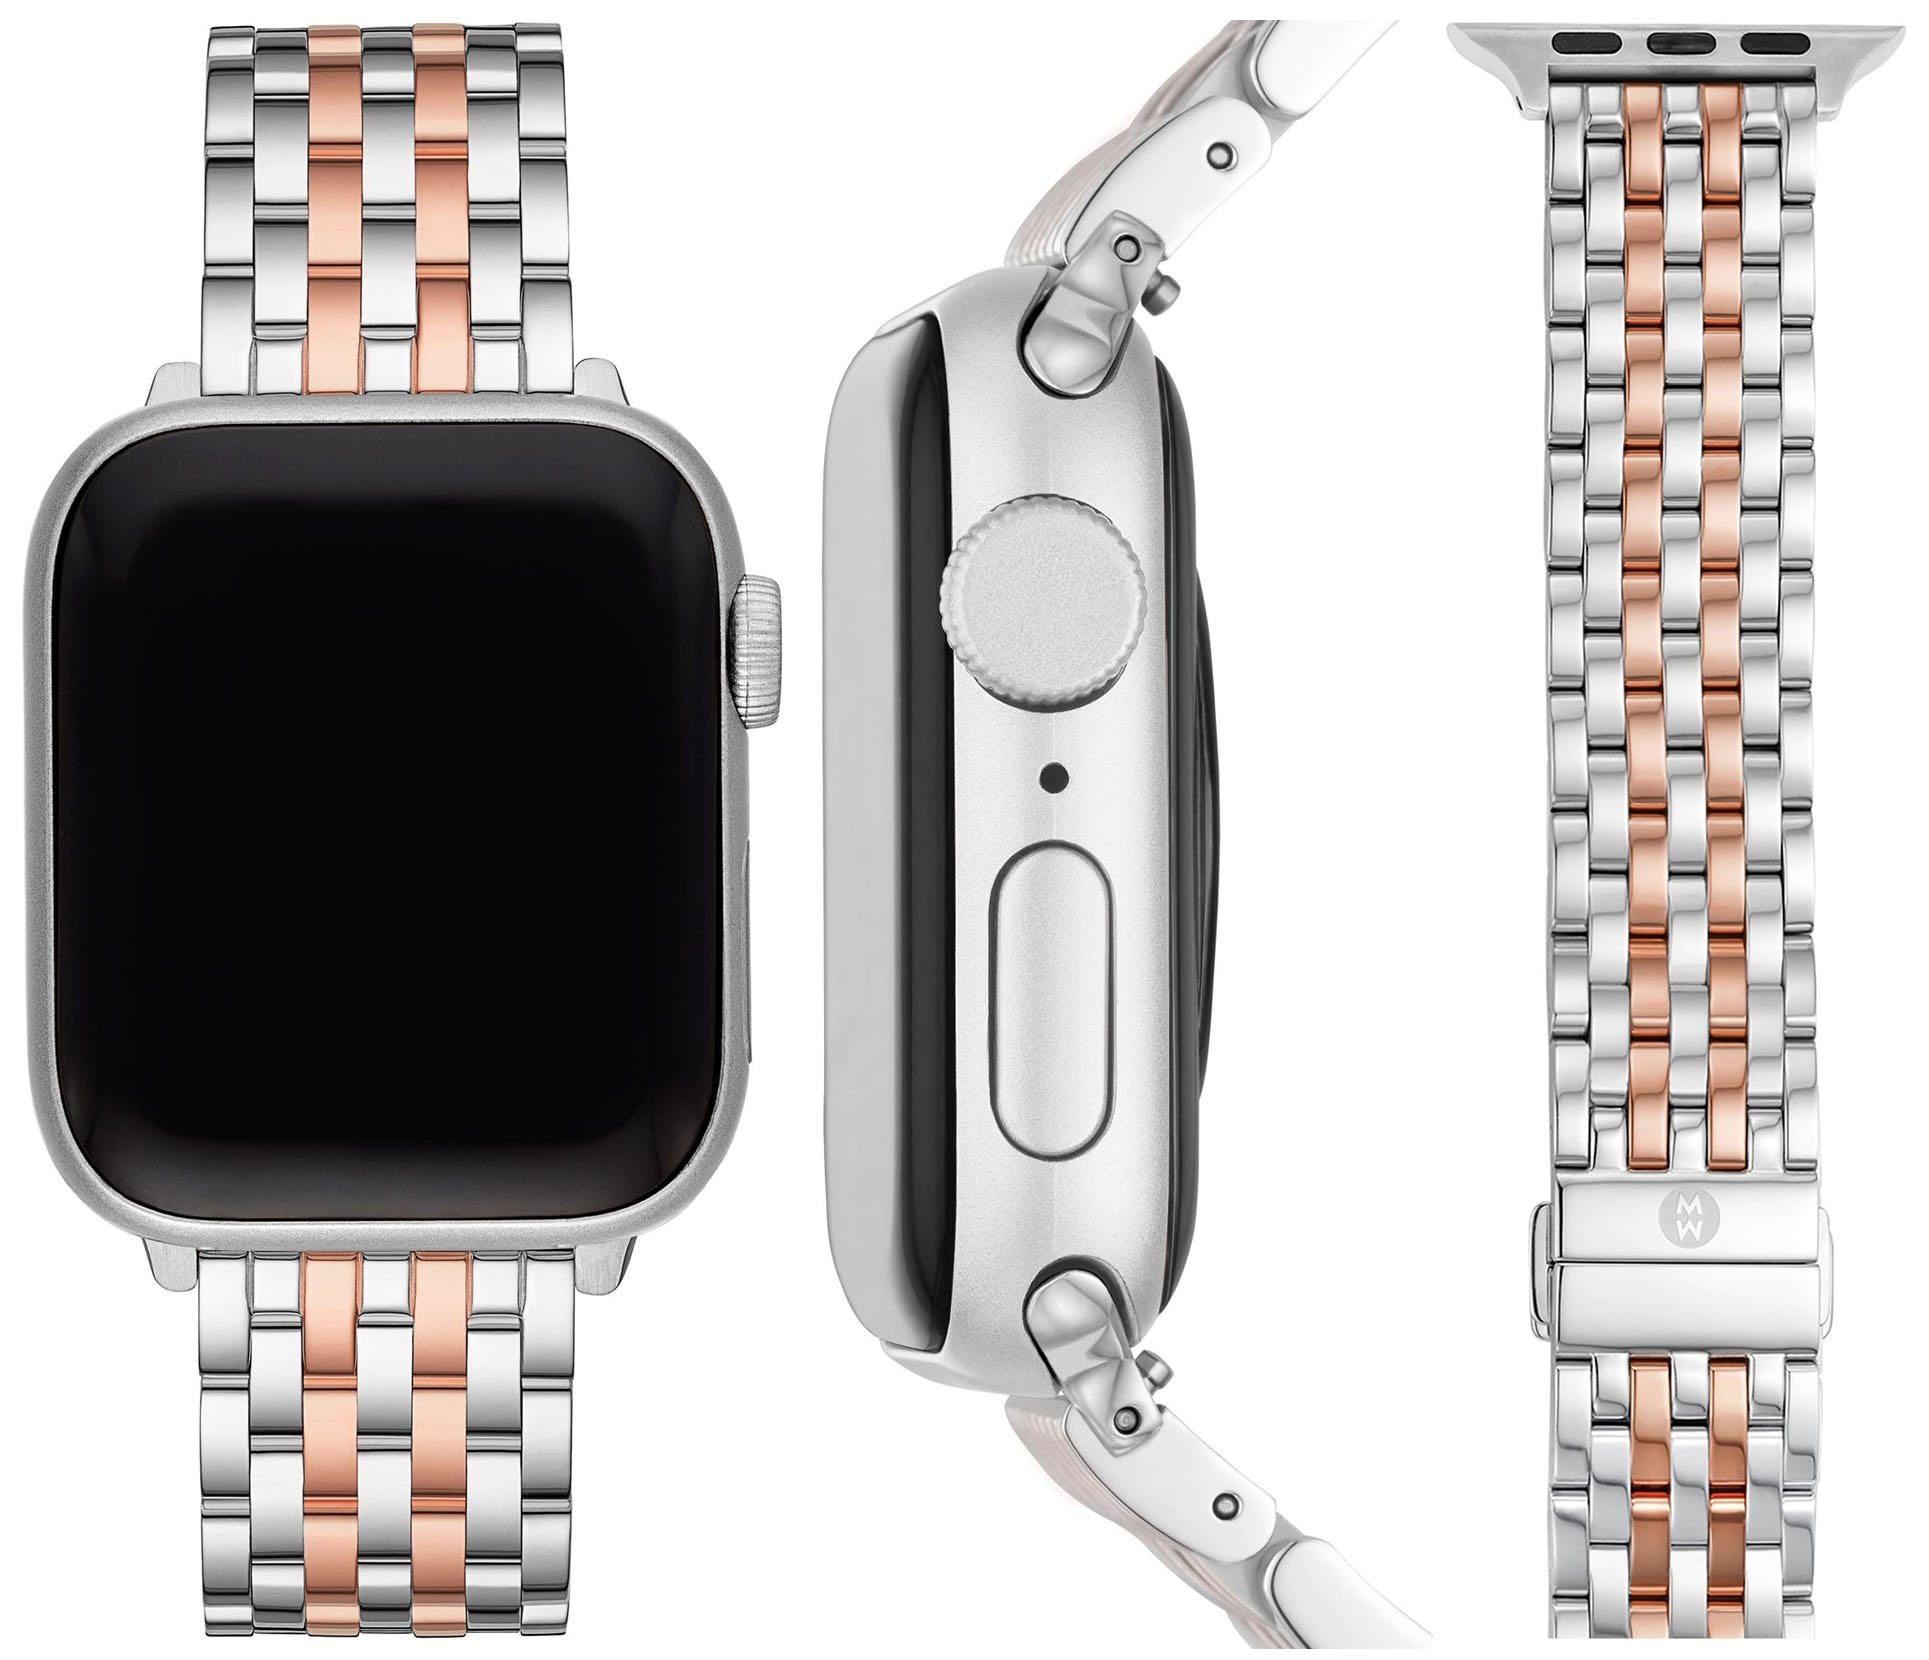 Sleek and chic, Michele's stainless-steel Apple Watch bracelet strap features a two-tone design plated in rosy 18-karat gold